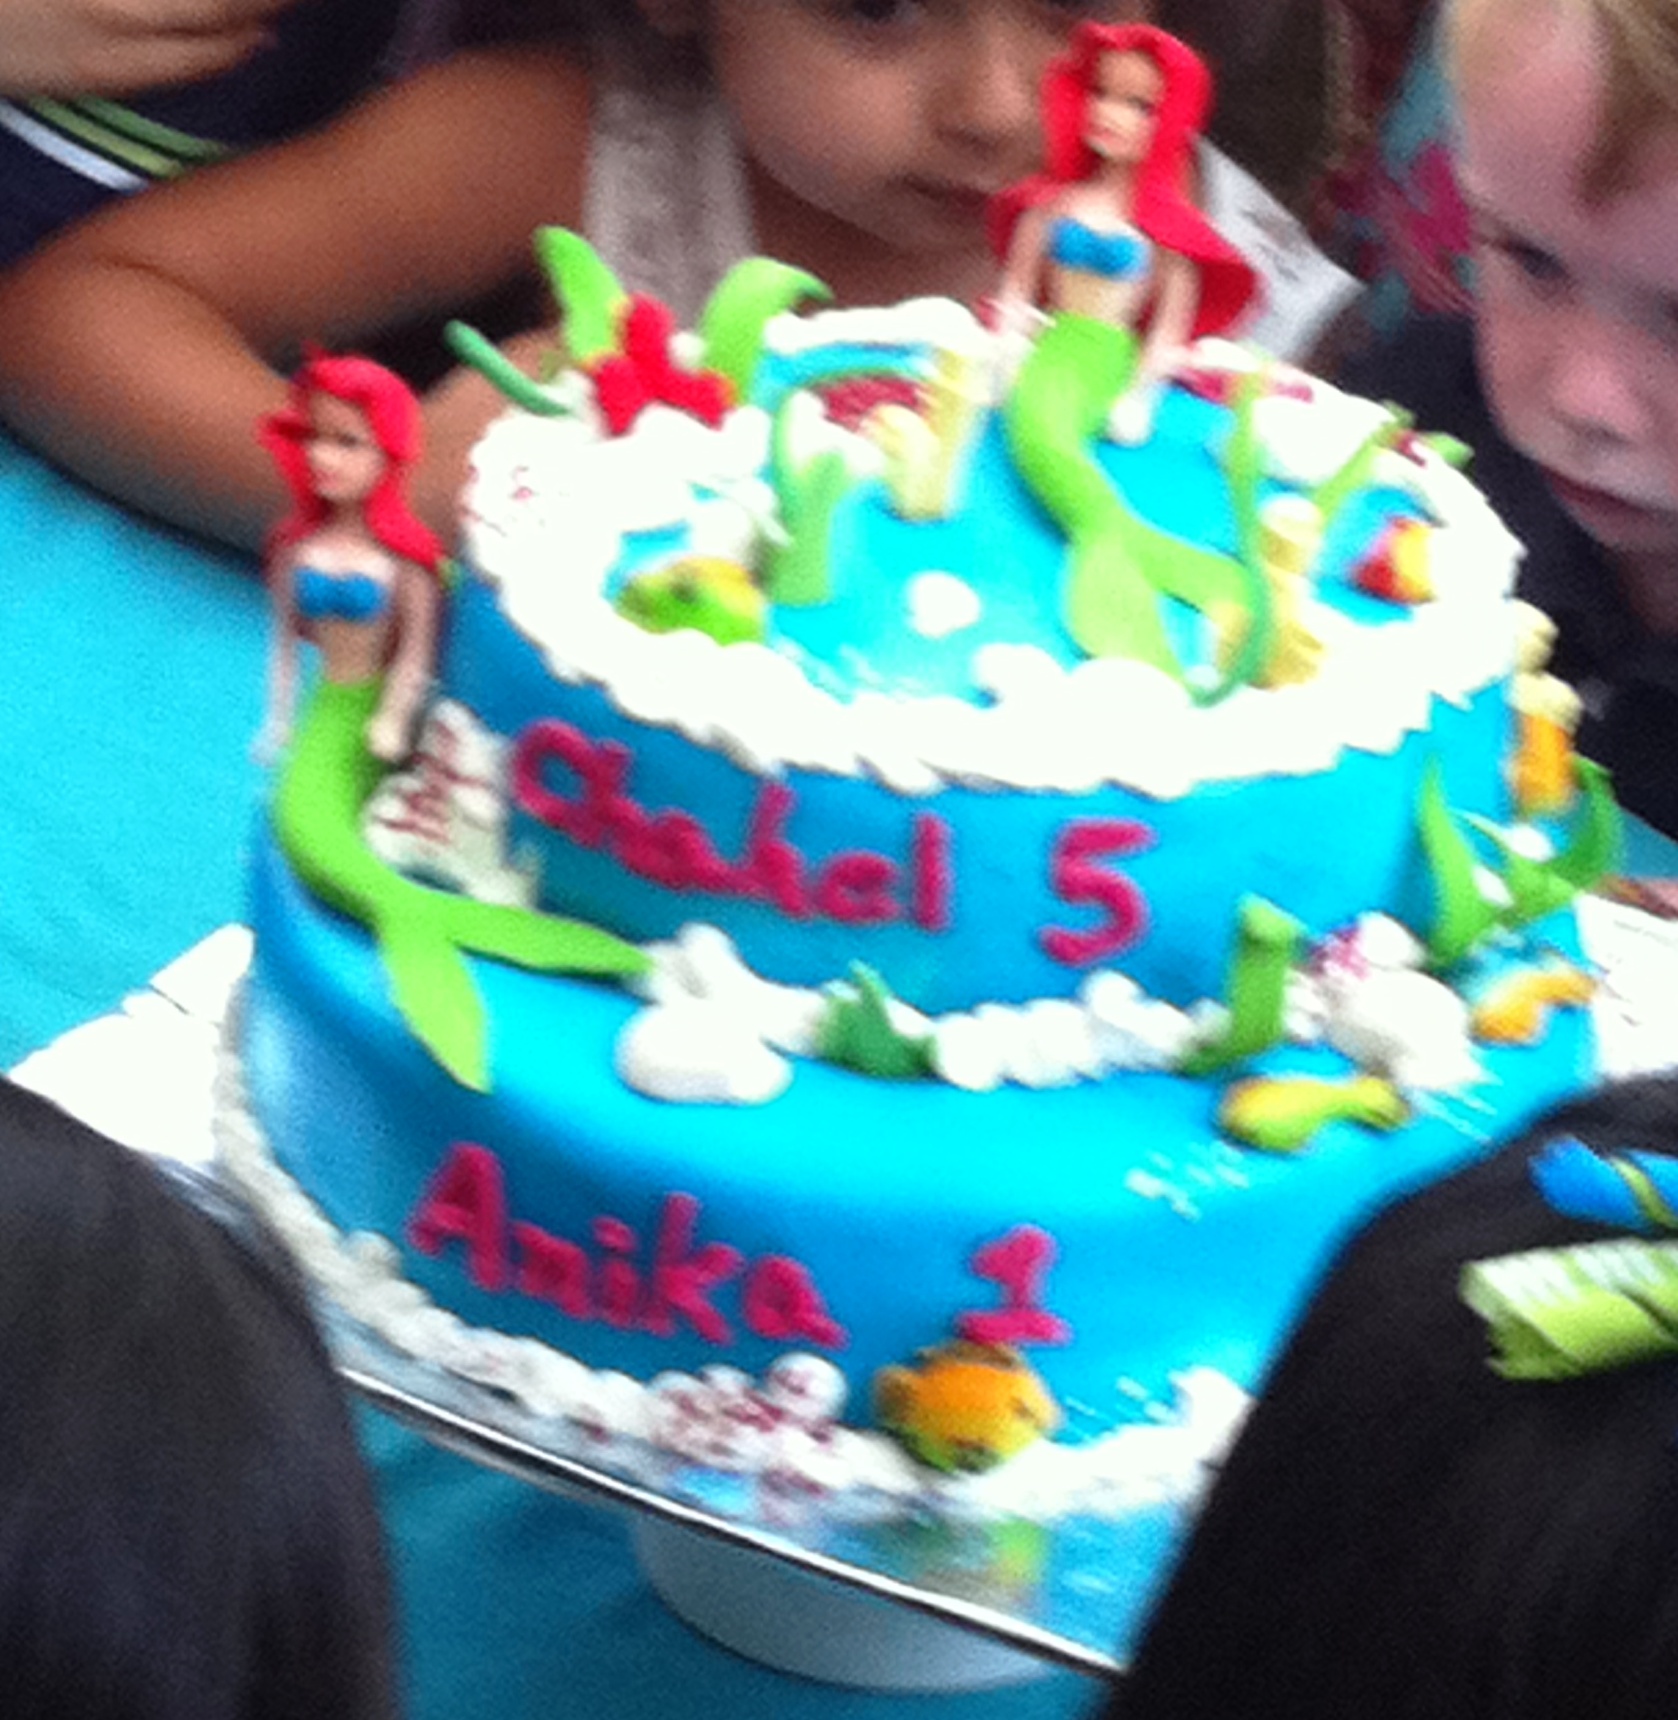 A rather blurry shot of the cake